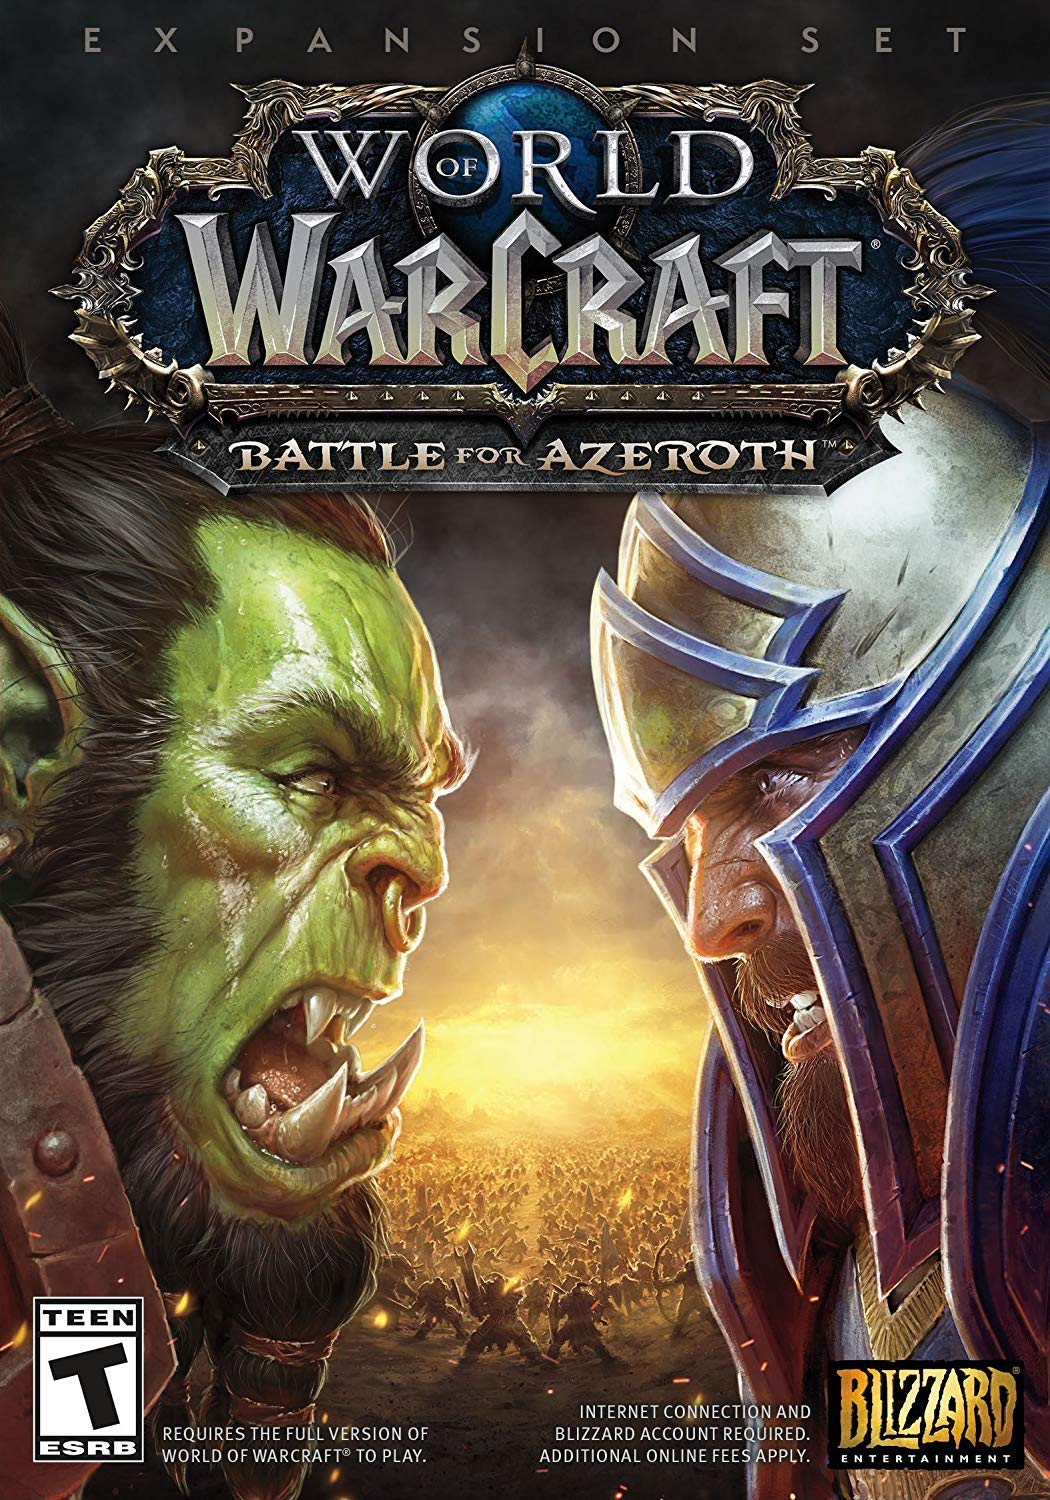 World of Warcraft: Battle for Azeroth player count stats